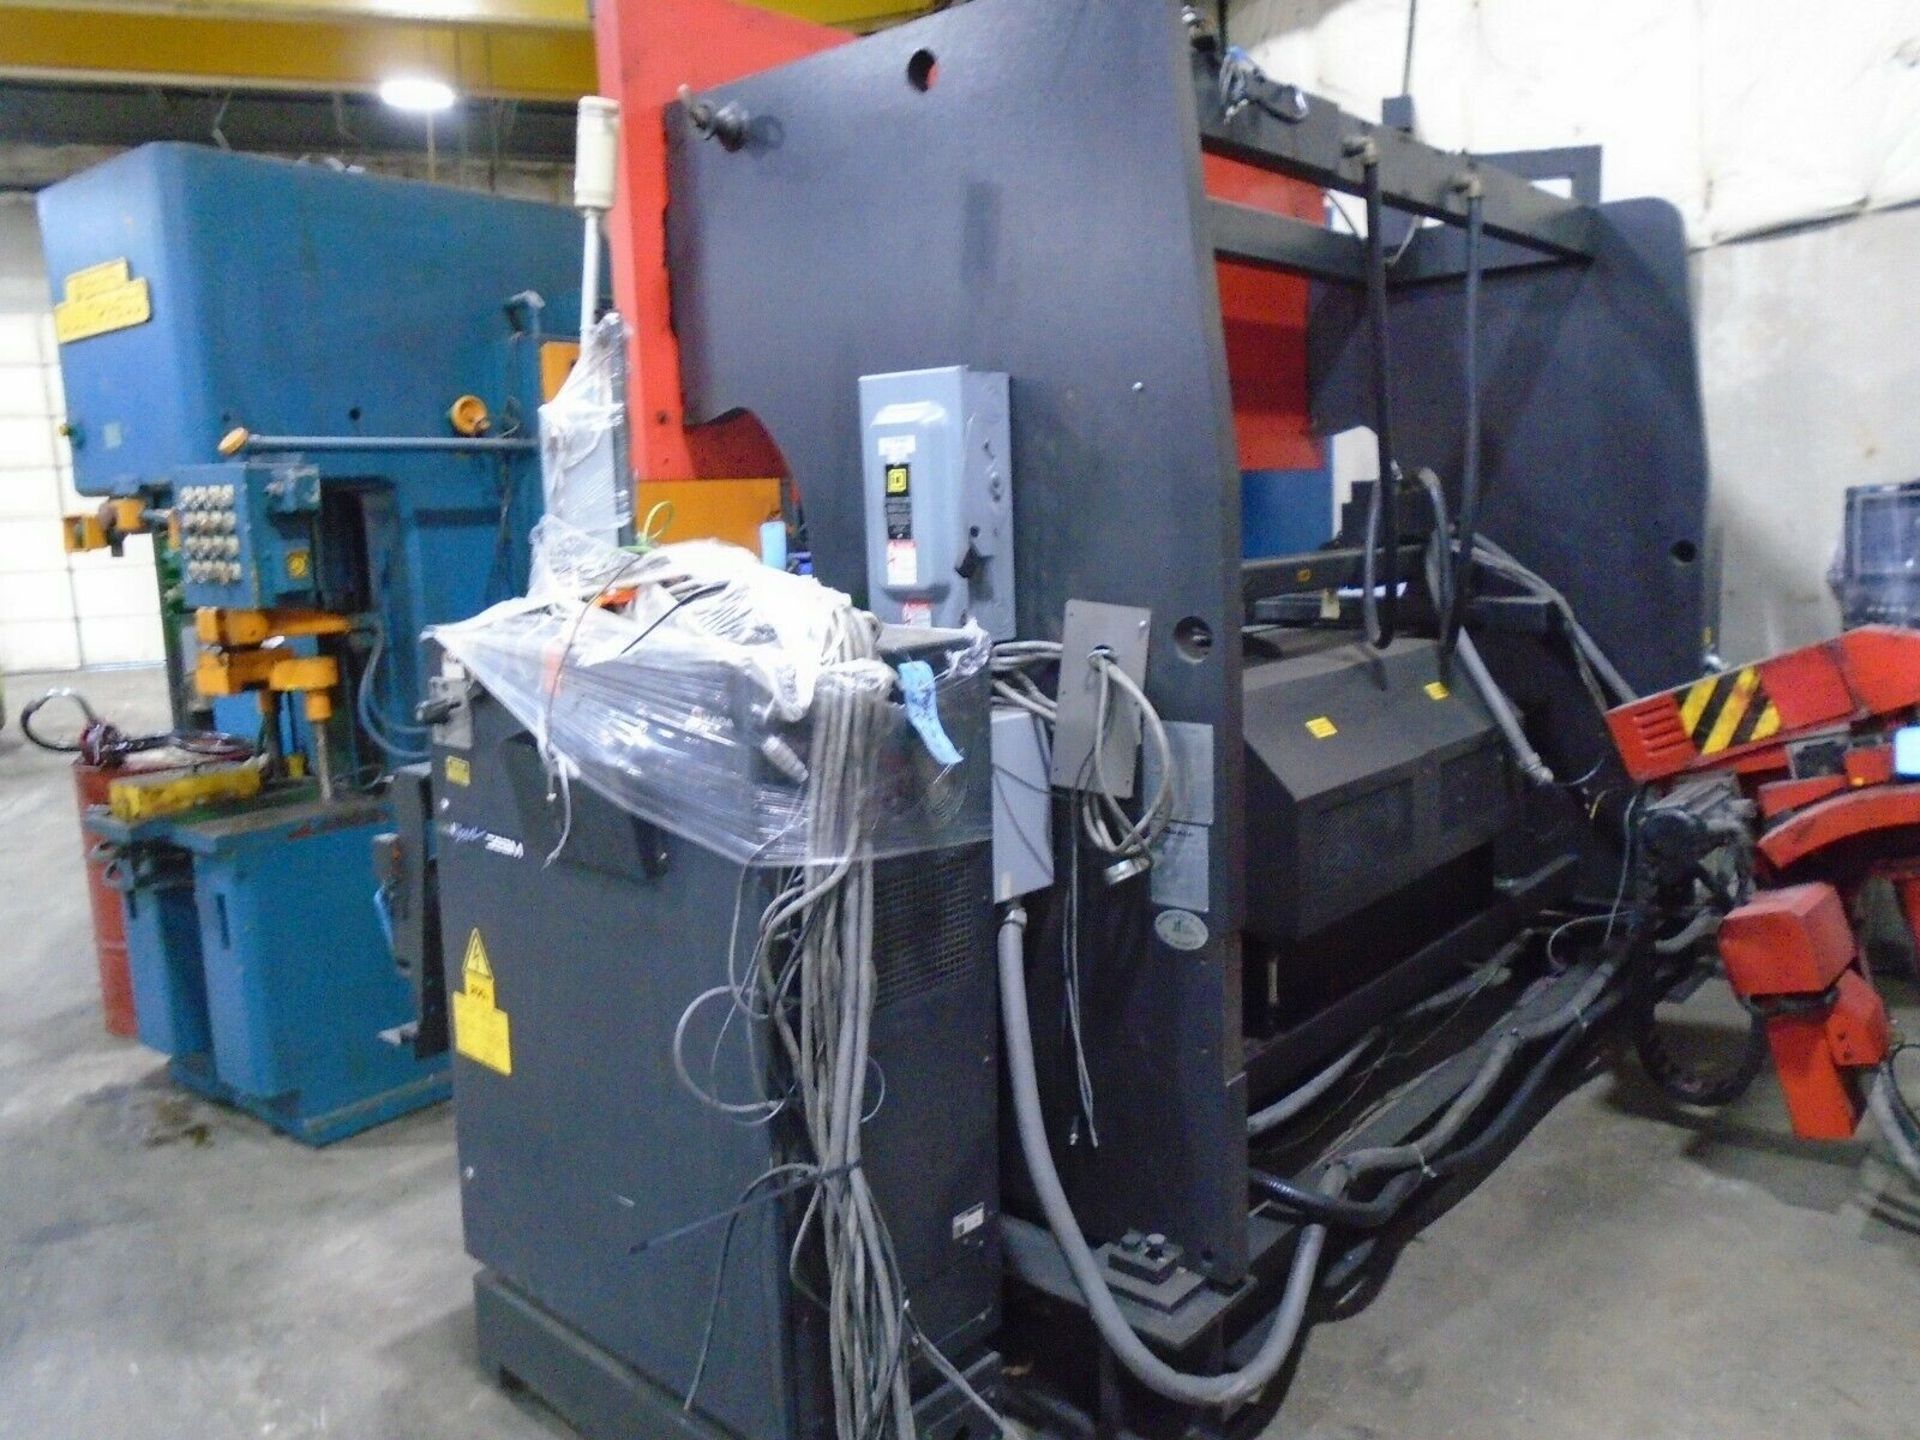 Amada Astro FBD 1253 MH CNC Press Brake Bending Cell 125 Tons x 10’ Year 1997 - Image 7 of 12